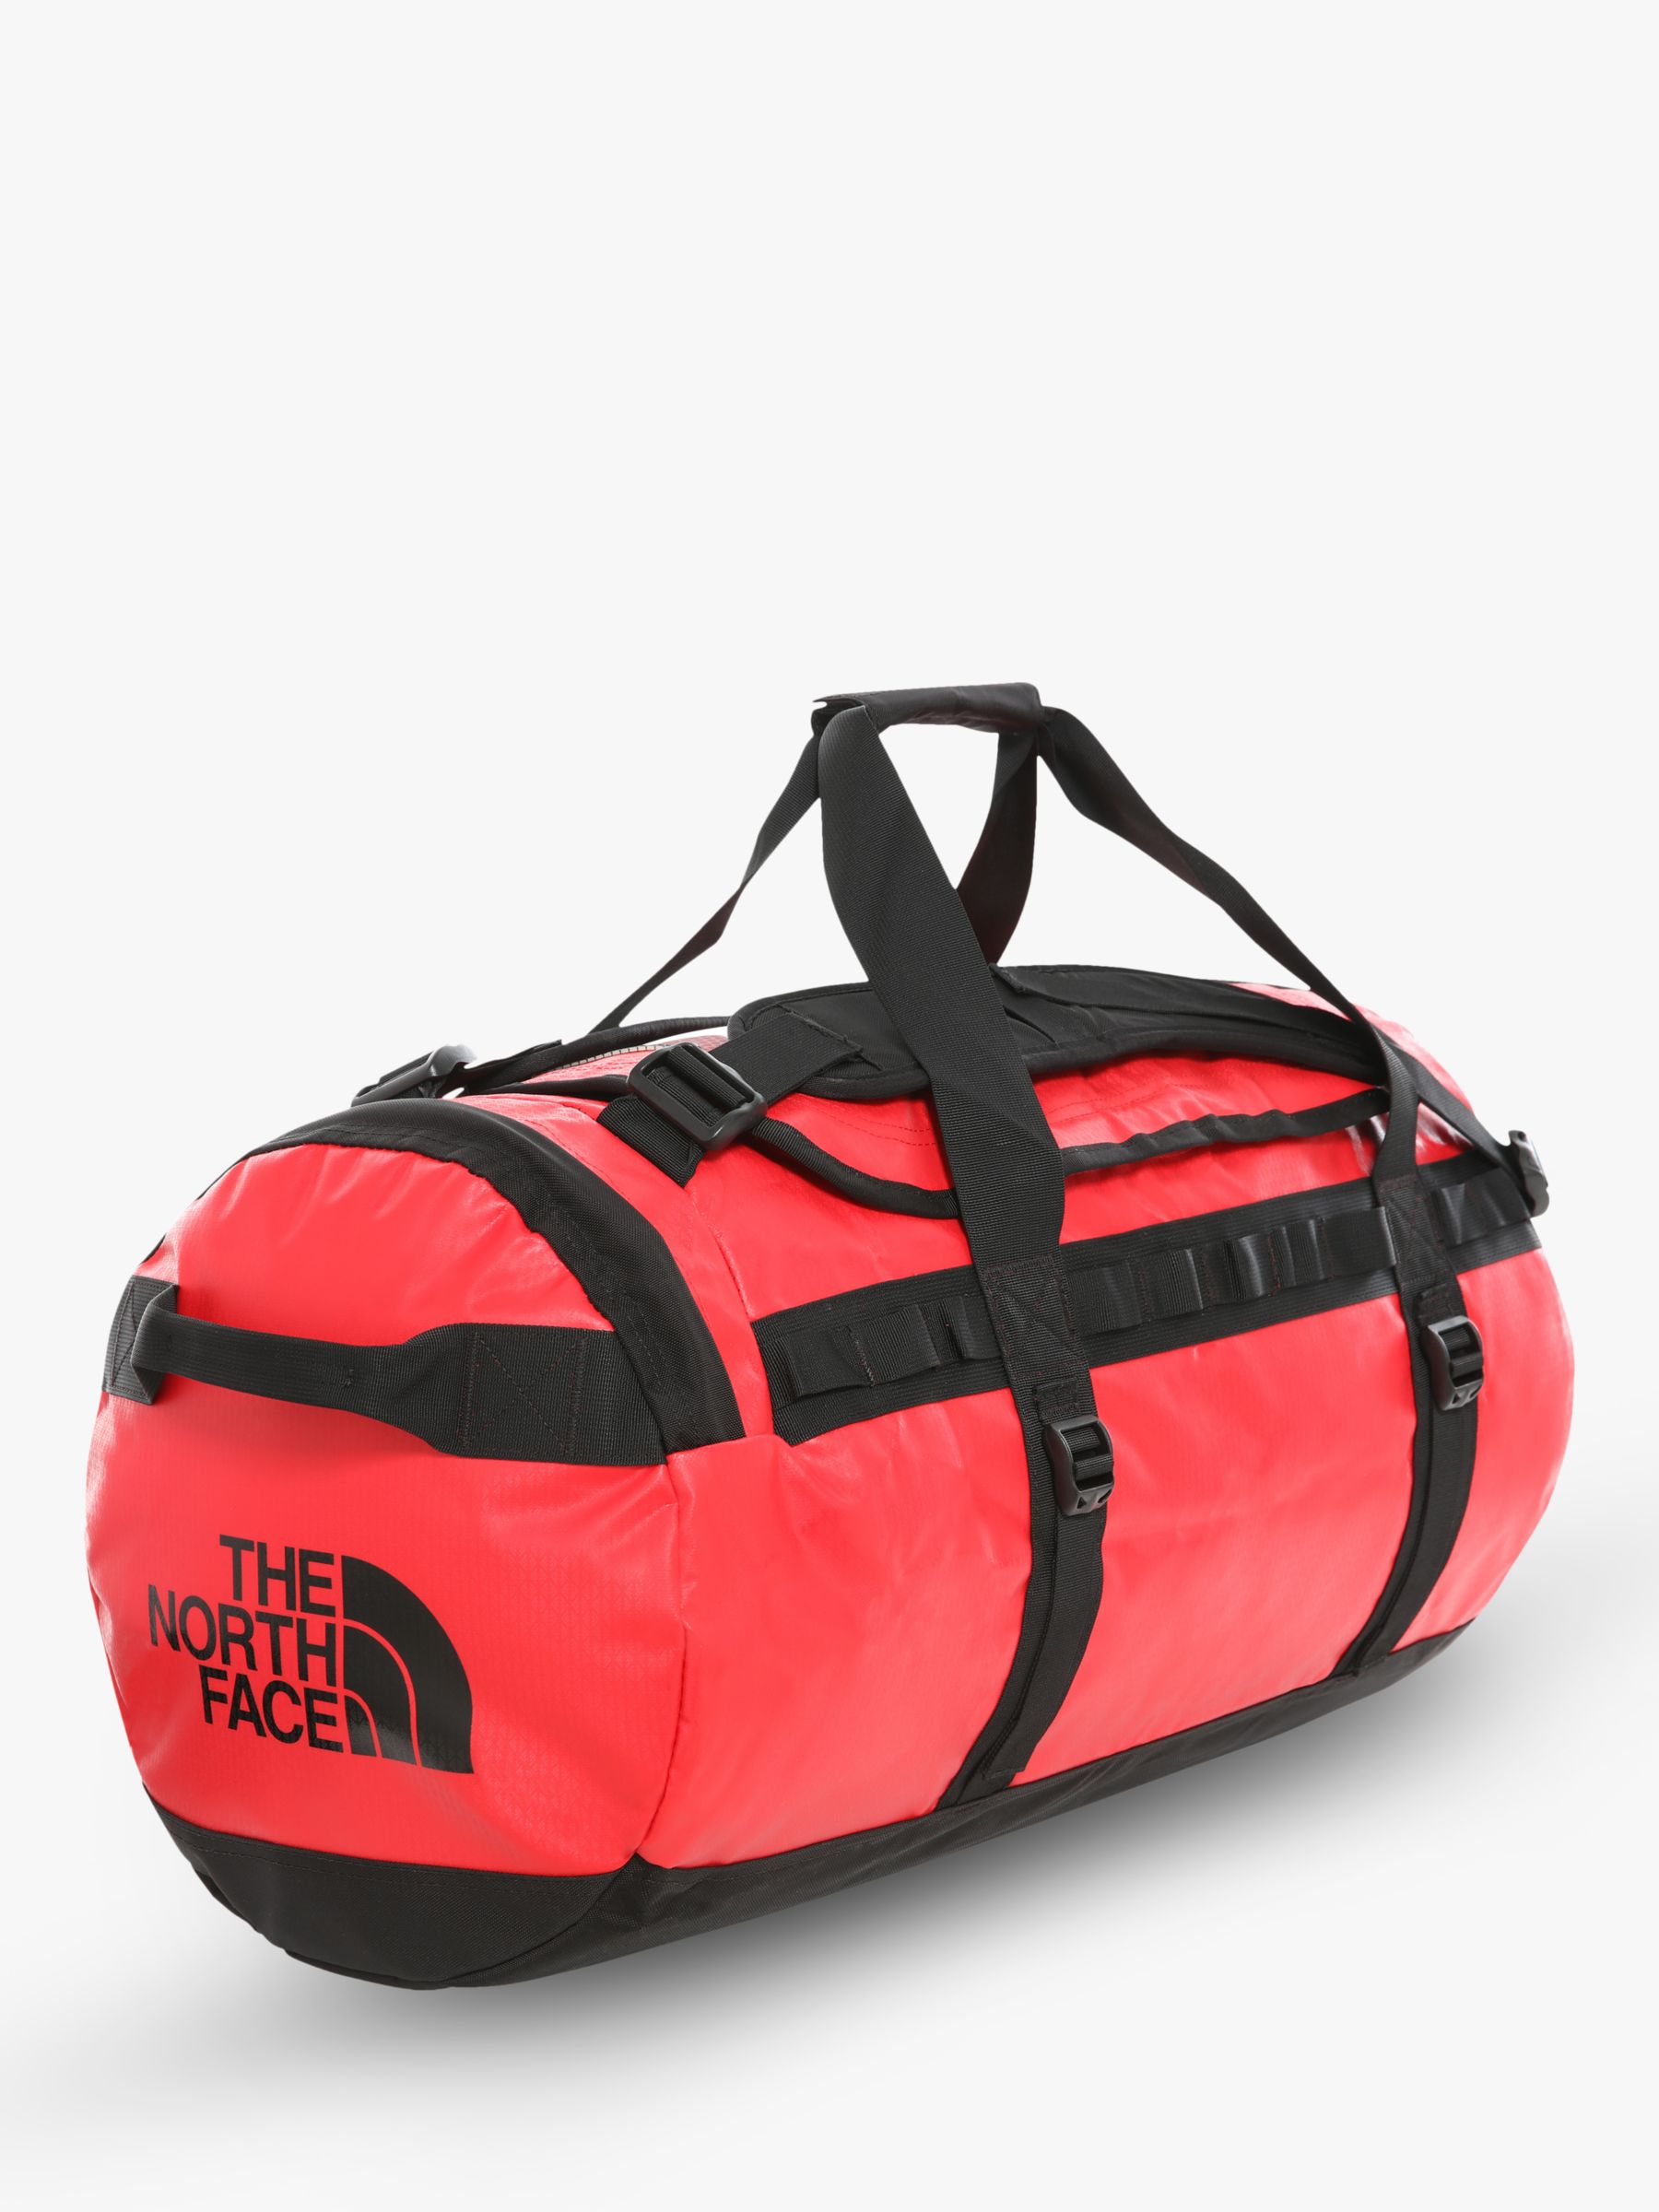 Mens Bags Gym bags and sports bags The North Face Medium Base Camp Duffel Bag Red for Men 